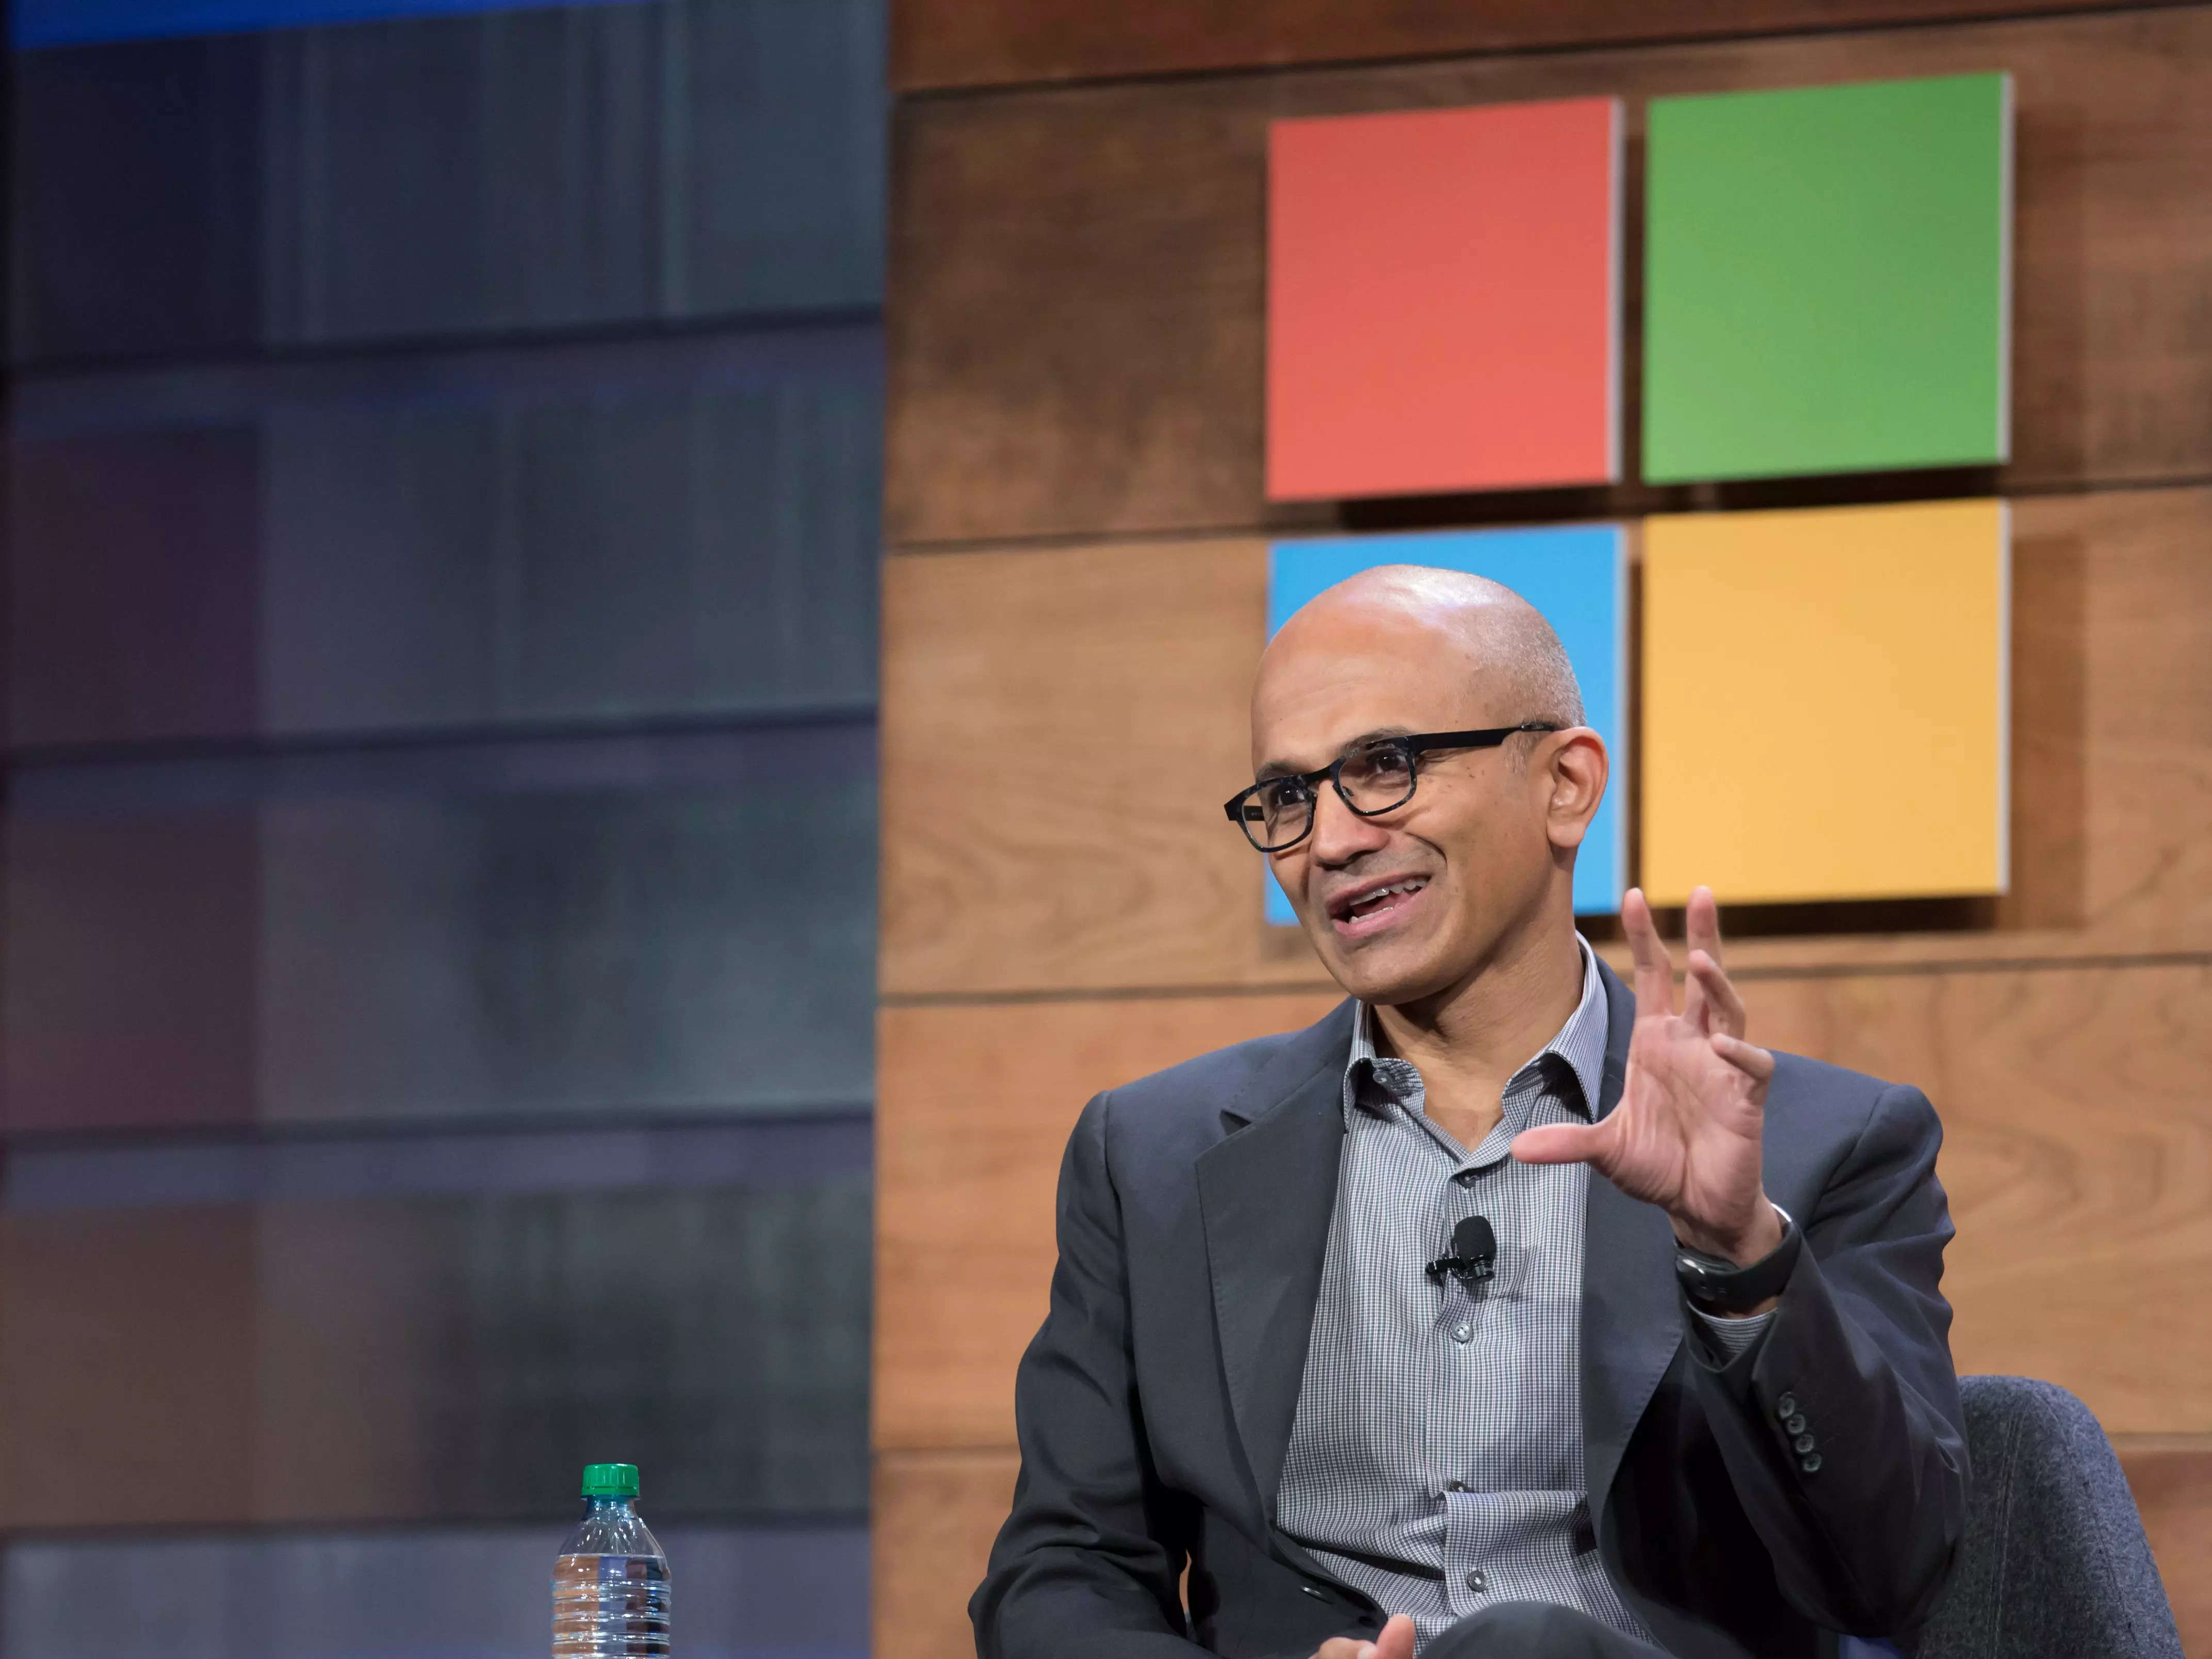 Microsoft CEO Satya Nadella says the nice cloud slowdown will not final eternally as he shares his plan for an enormous bounce again